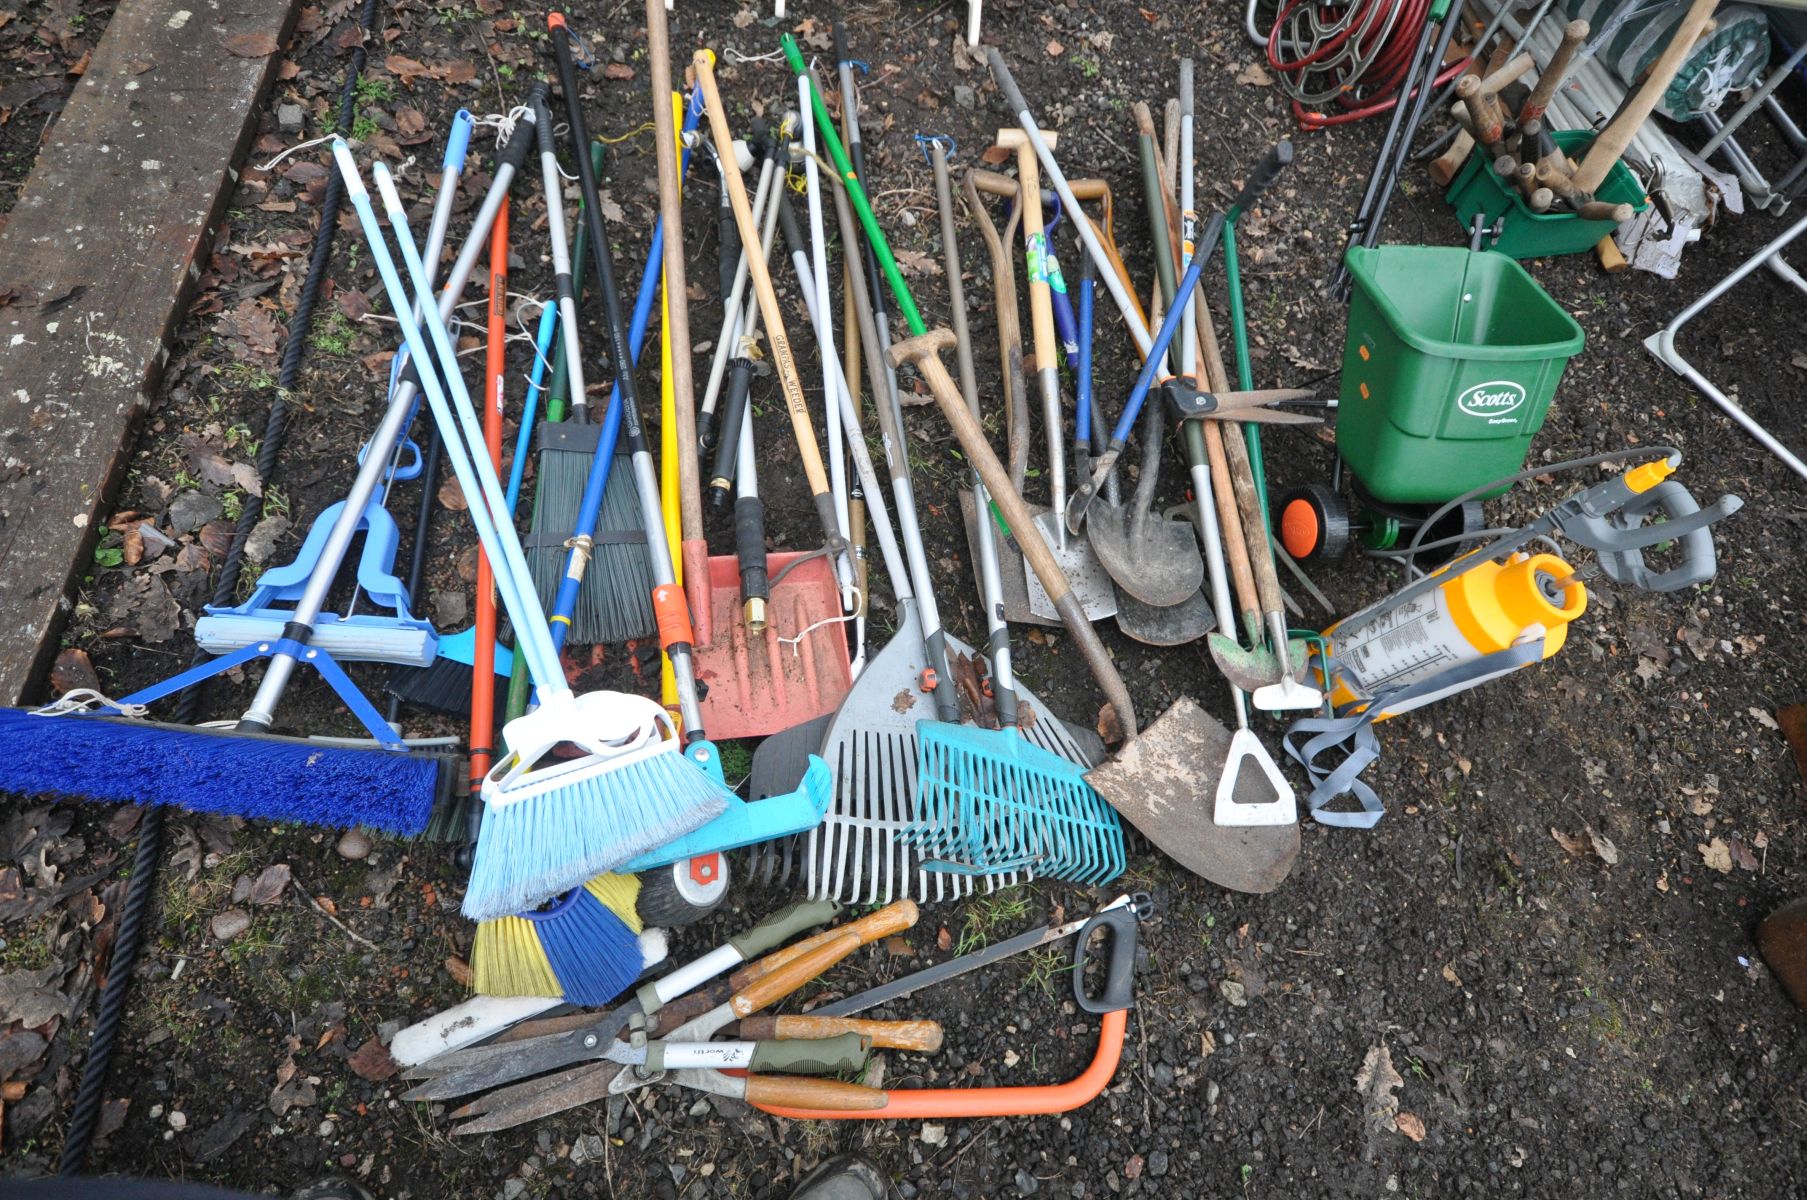 A LARGE QUANTITY OF VARIOUS GARDEN TOOLS, to include spades, shovels, brushes, scotts seed spreader,